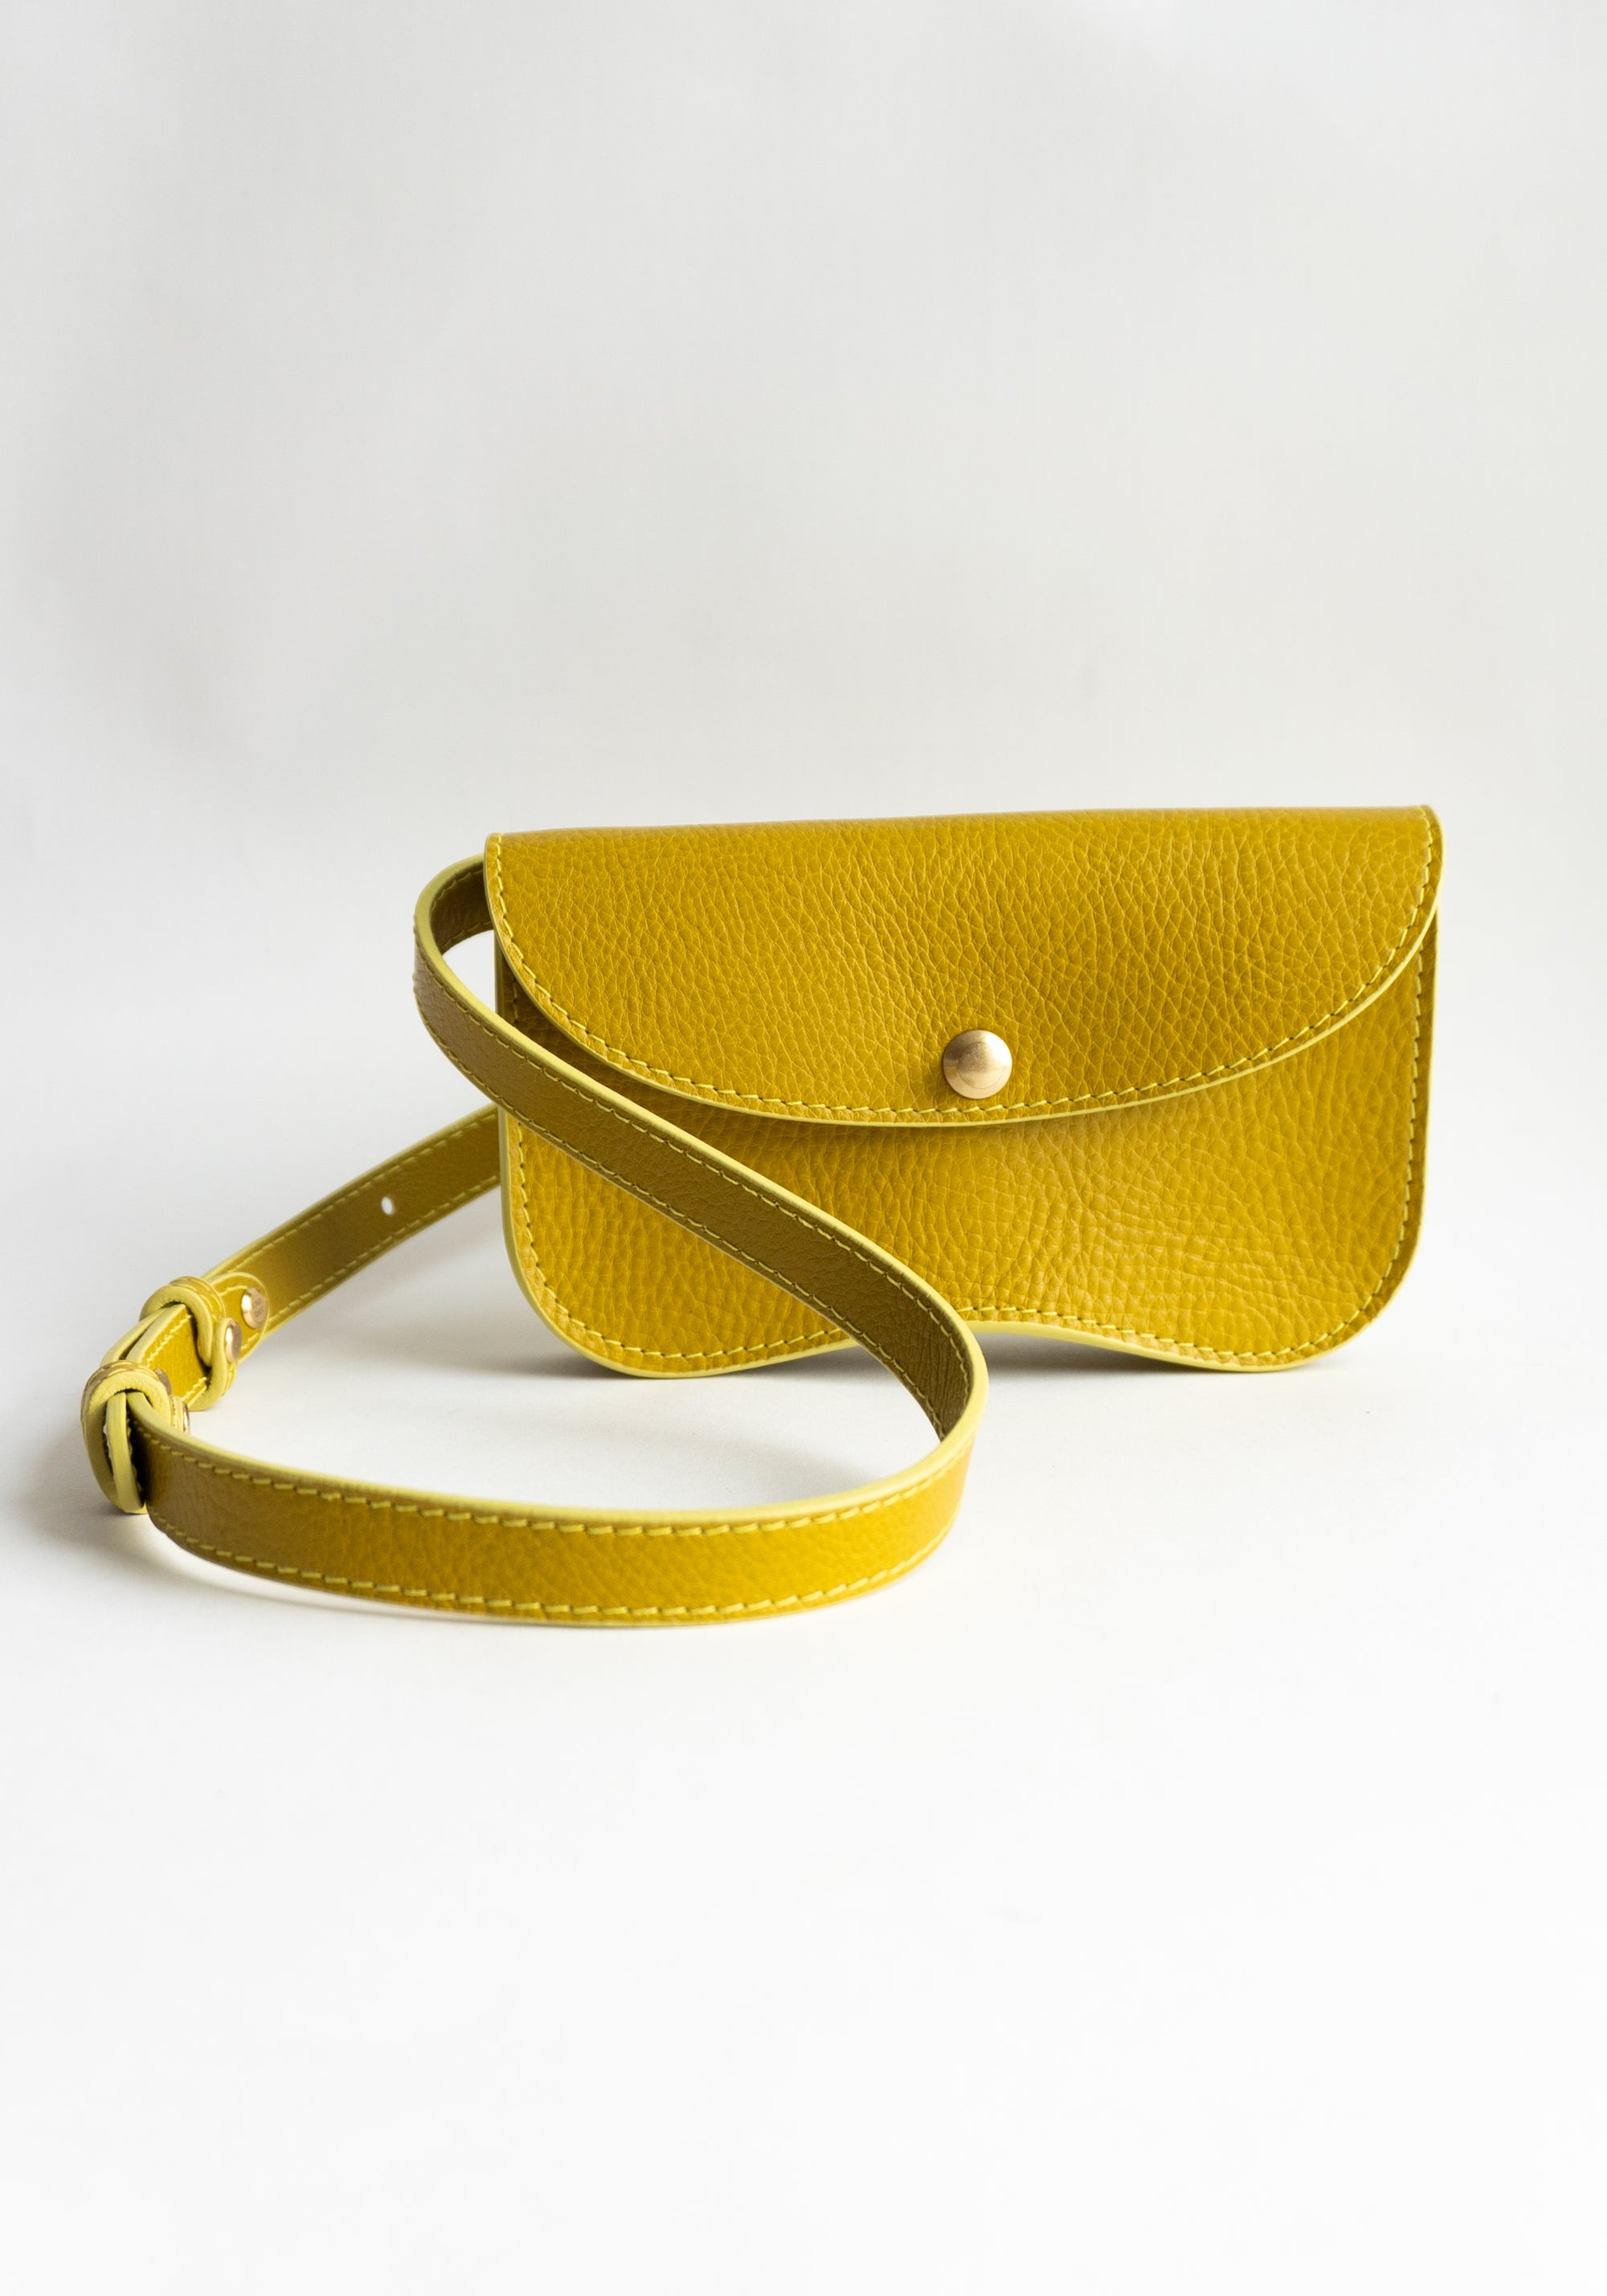 Lindquist Faba Bag in Chartreuse